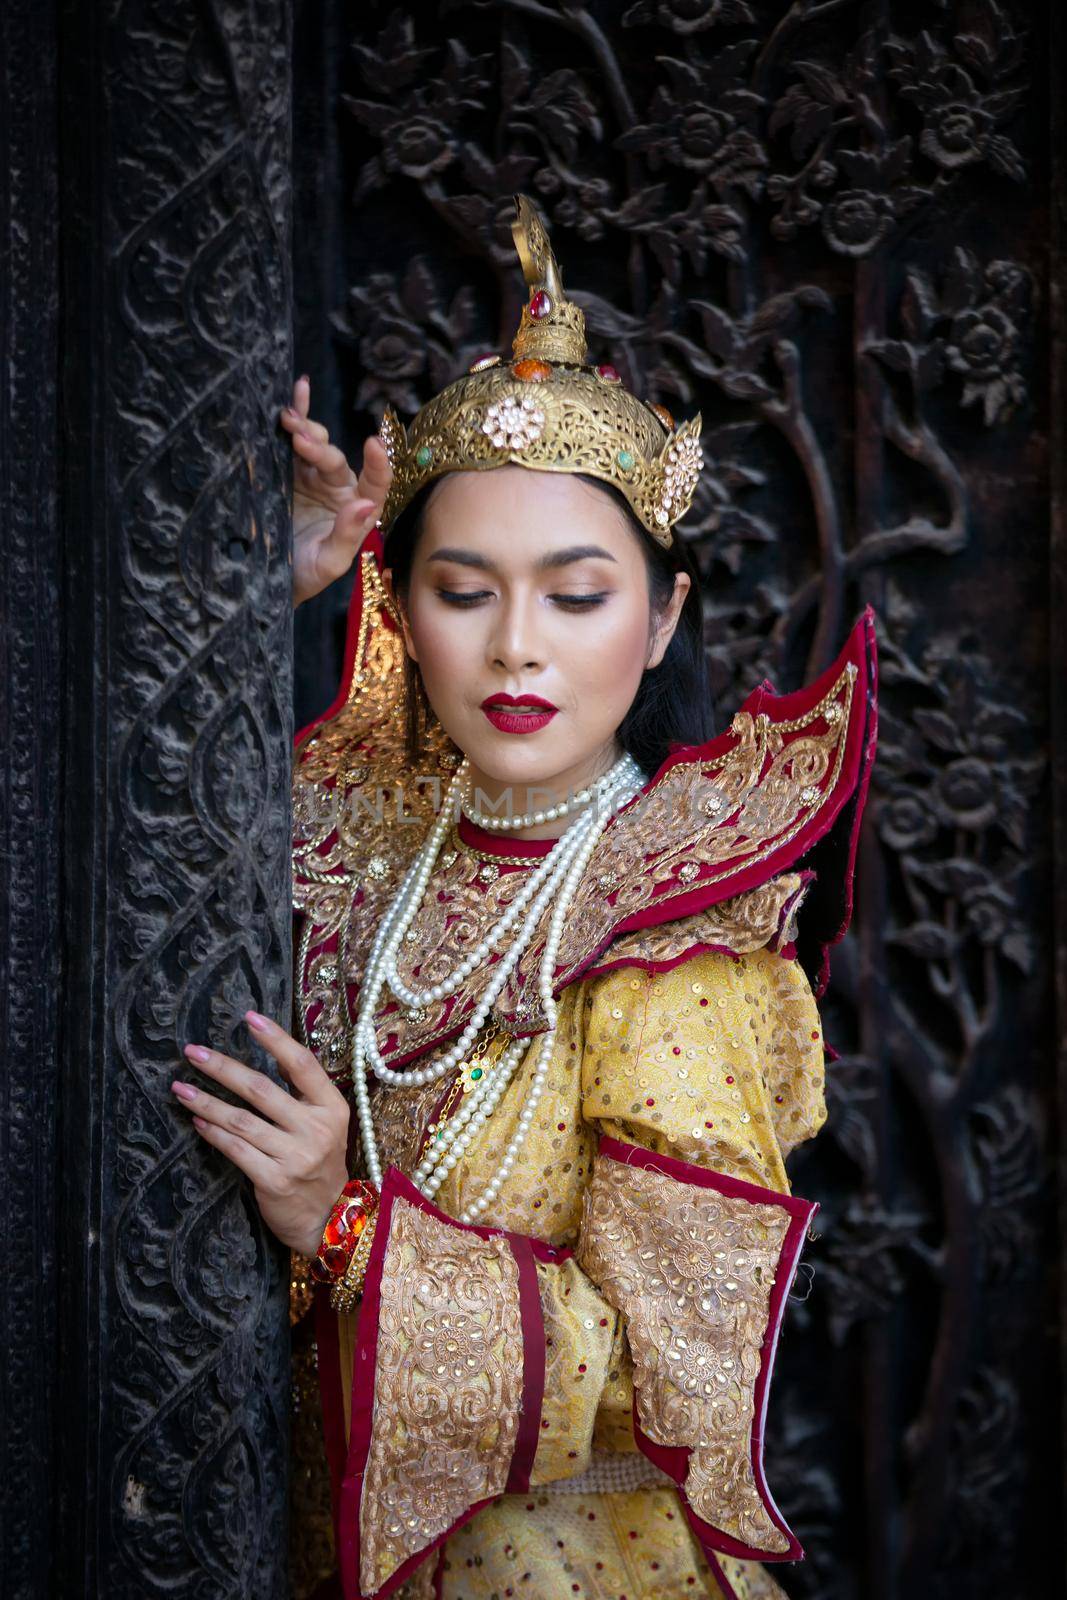 Portrait of an Asian Women in Mandalay, Myanmar Woman with golden Traditional Clothes are Standing Against Art Carving Wooden Door. by chuanchai